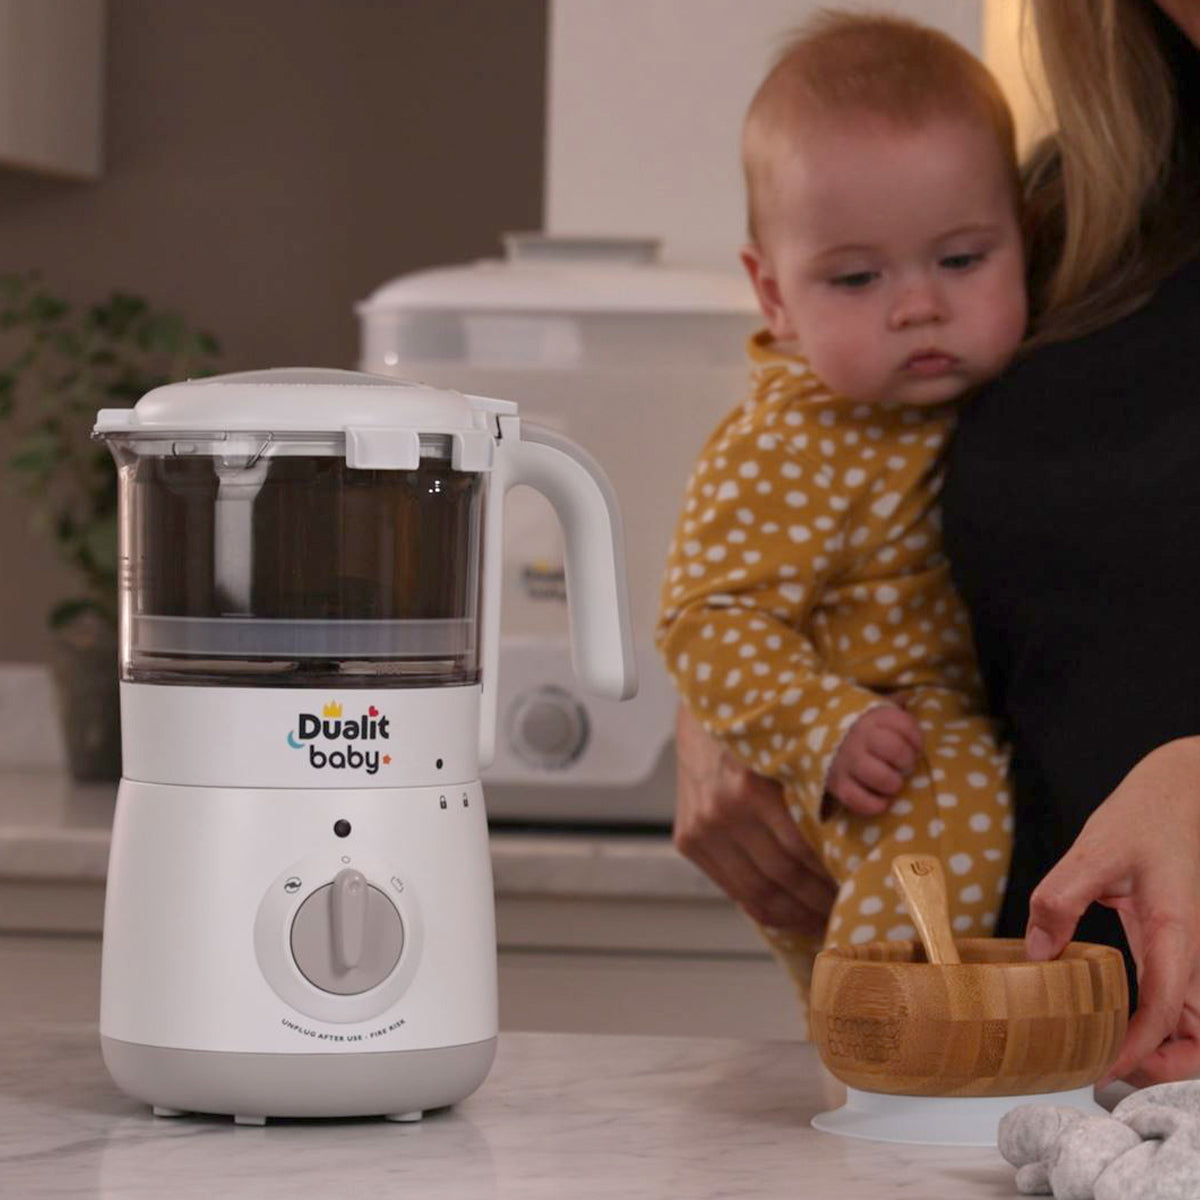 Baby Weaning Made Simple with the New Dualit Baby Food Maker